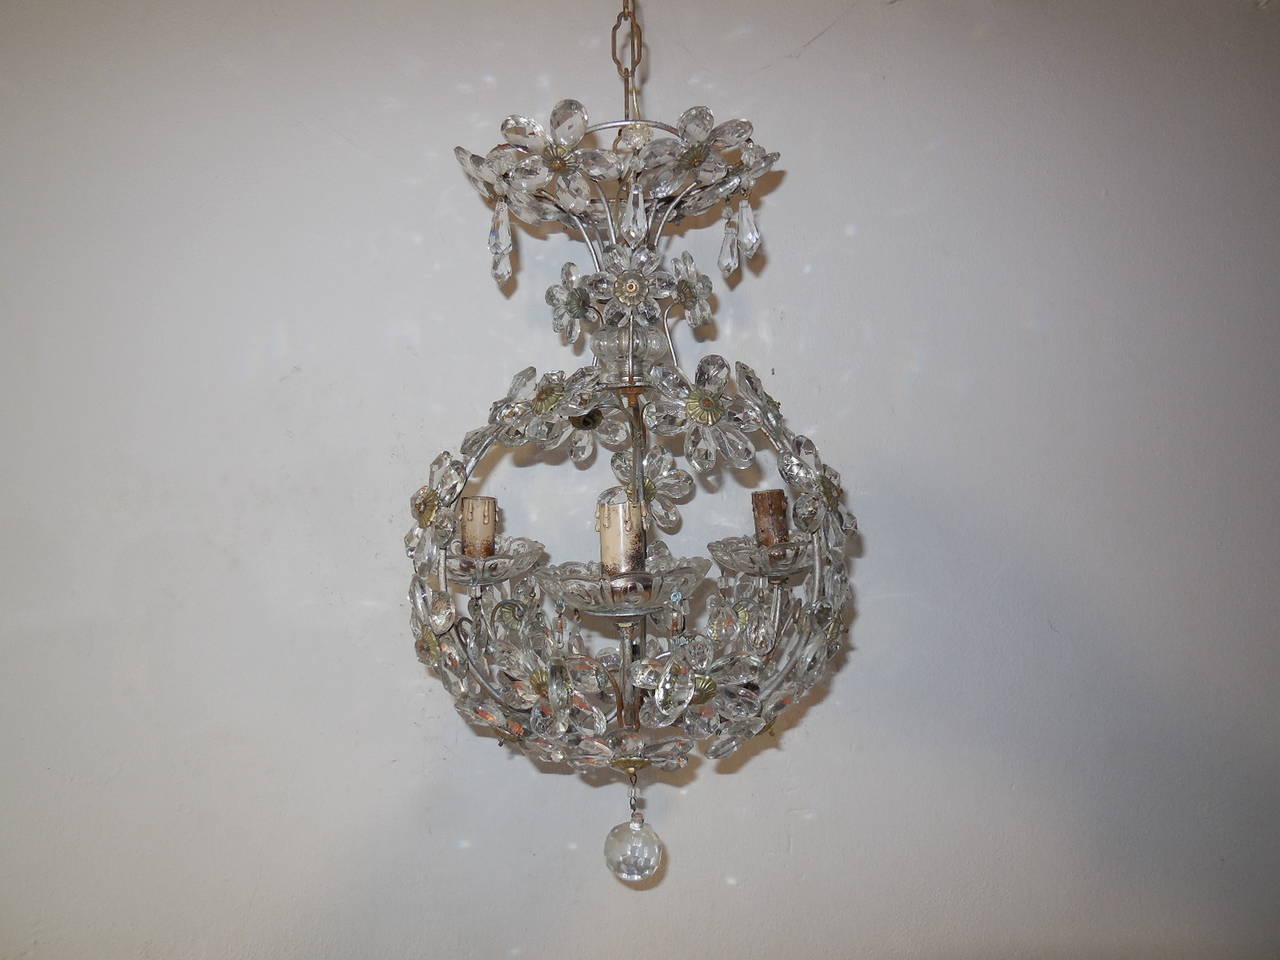 Beautiful Bagues chandelier housing an impressive 3 lights, sitting in crystal bobeches dripping with vintage prisms.  Silver metal body.  Murano glass on top.  Crystal prism flowers throughout, even on top!  Rewired and ready to hang!  Free